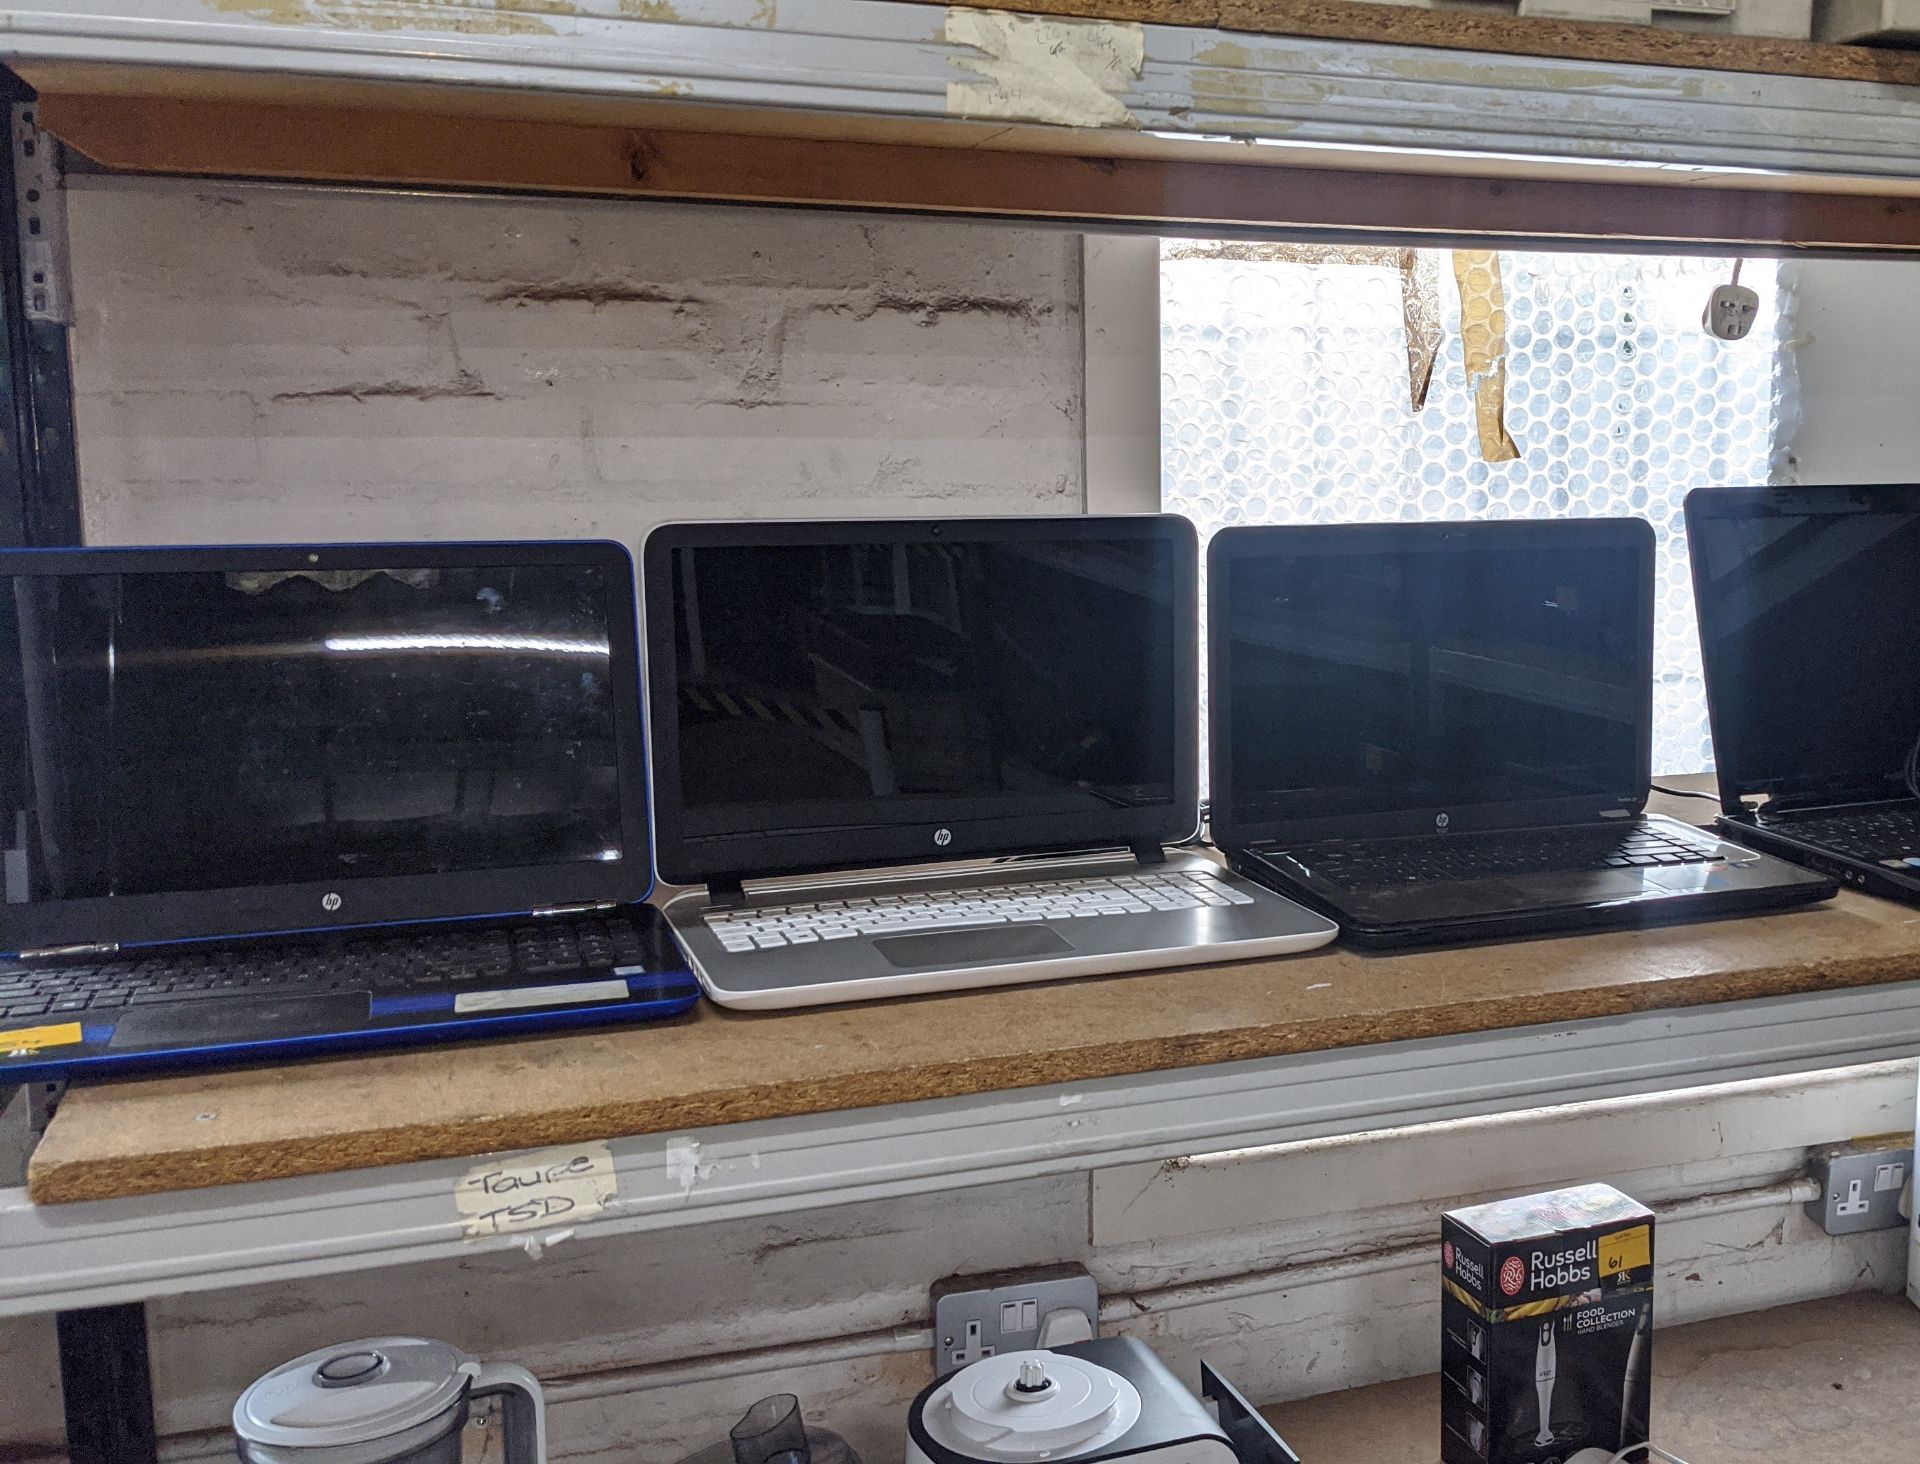 3 off HP notebook computers, mostly appear to be damaged/broken, only one of which includes a - Image 2 of 4